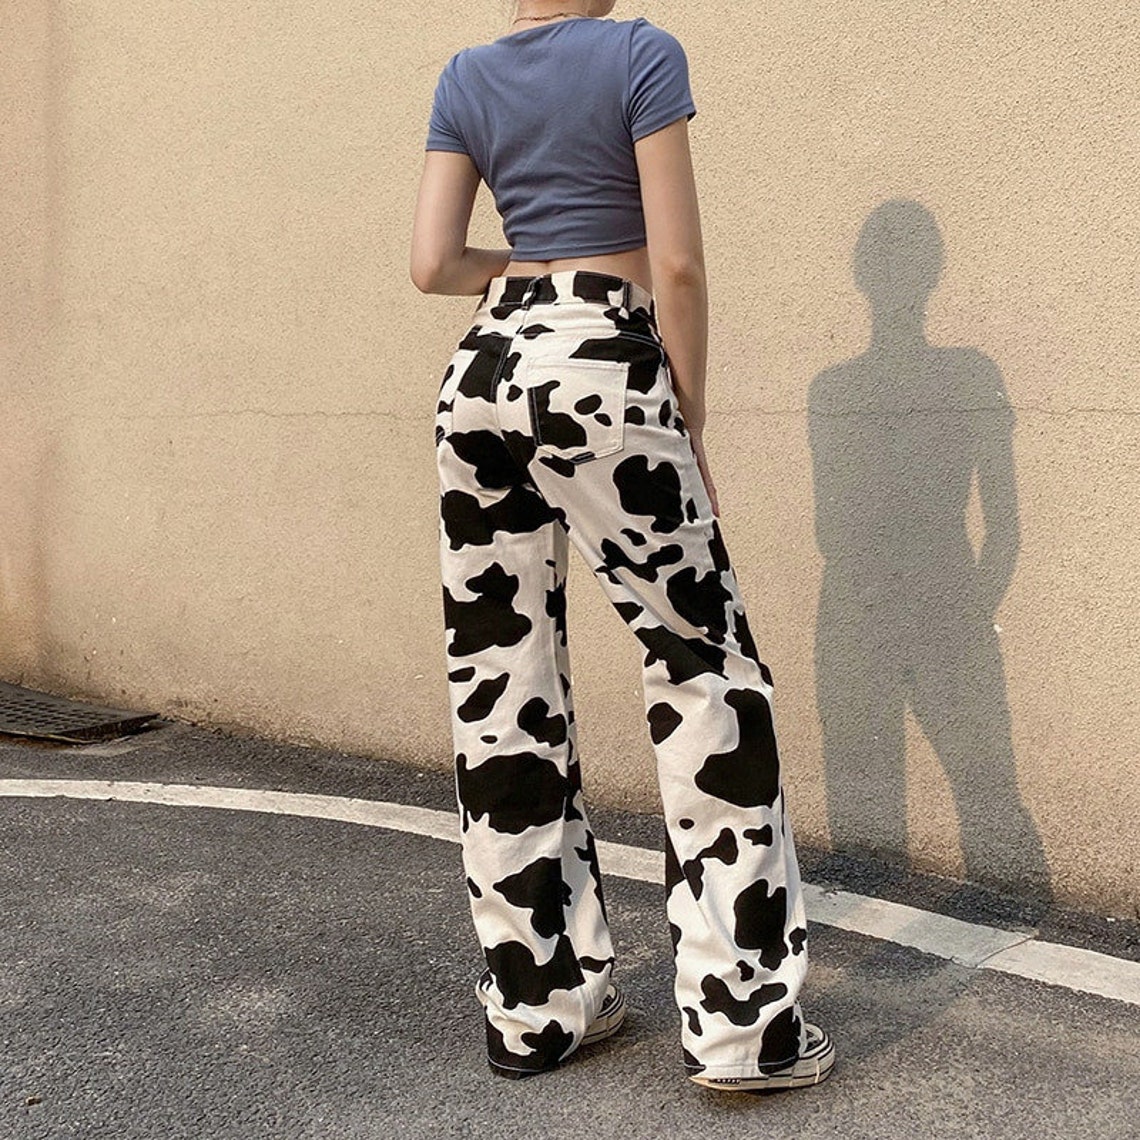 Cow Print High Waisted Casual Flare Jeans y2k Streetwear | Etsy